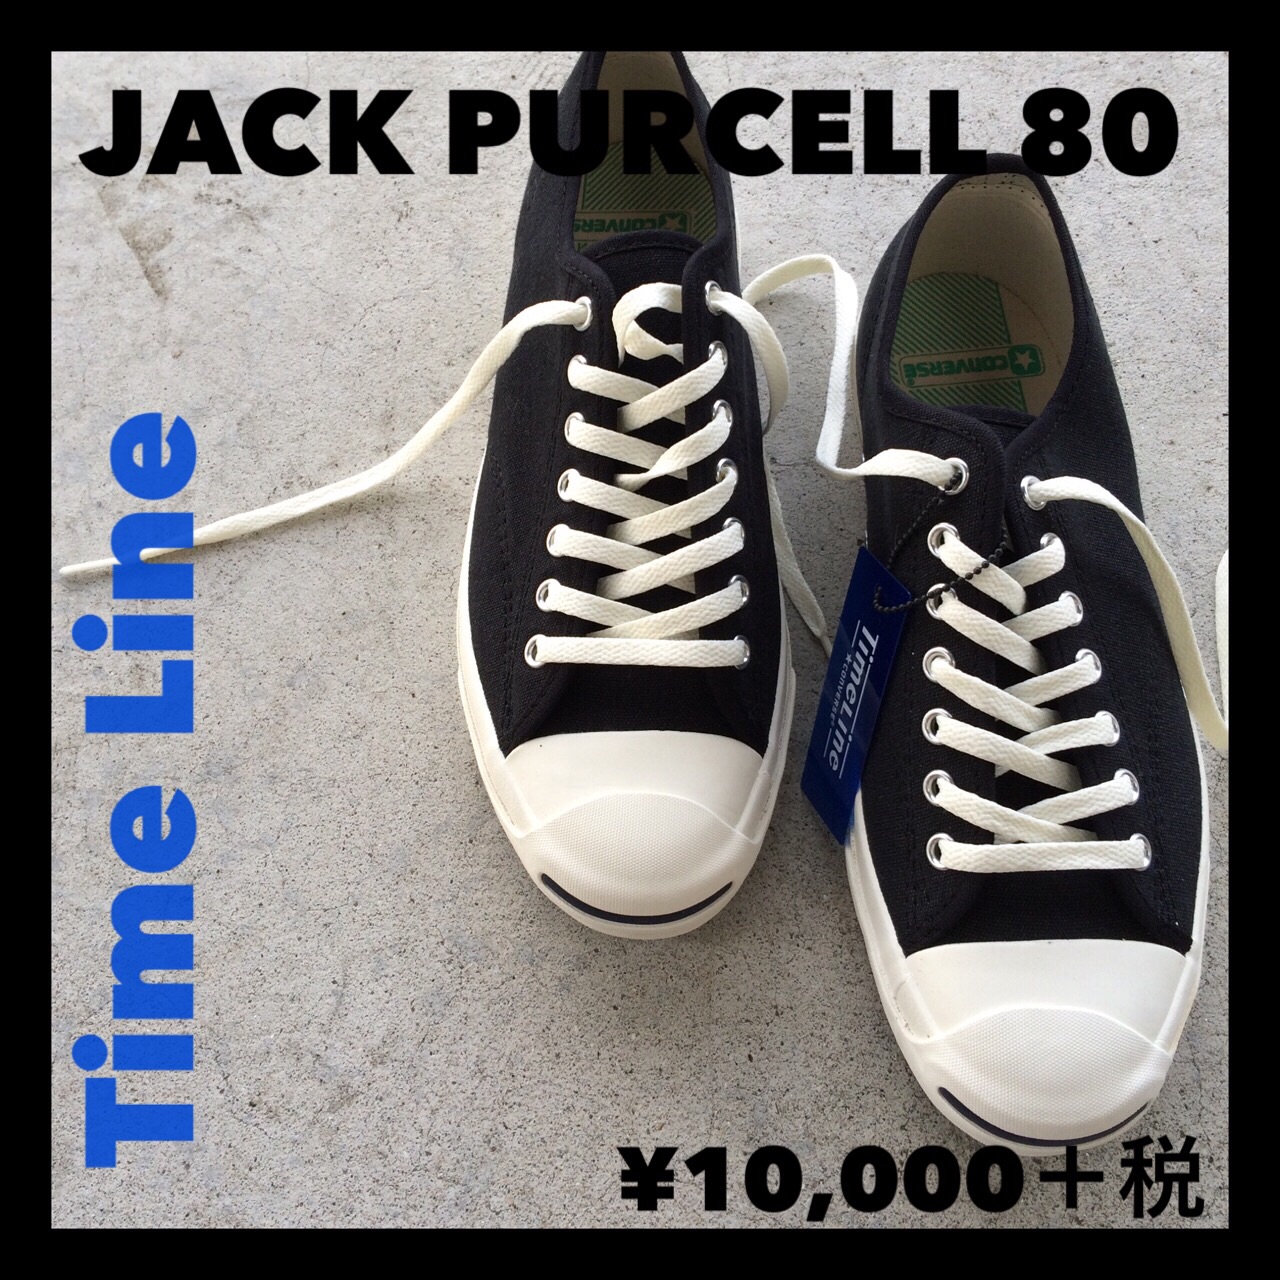 CONVERSE Time Line JACK PURCELL®80 BLACK 入荷！ | 靴のまつや